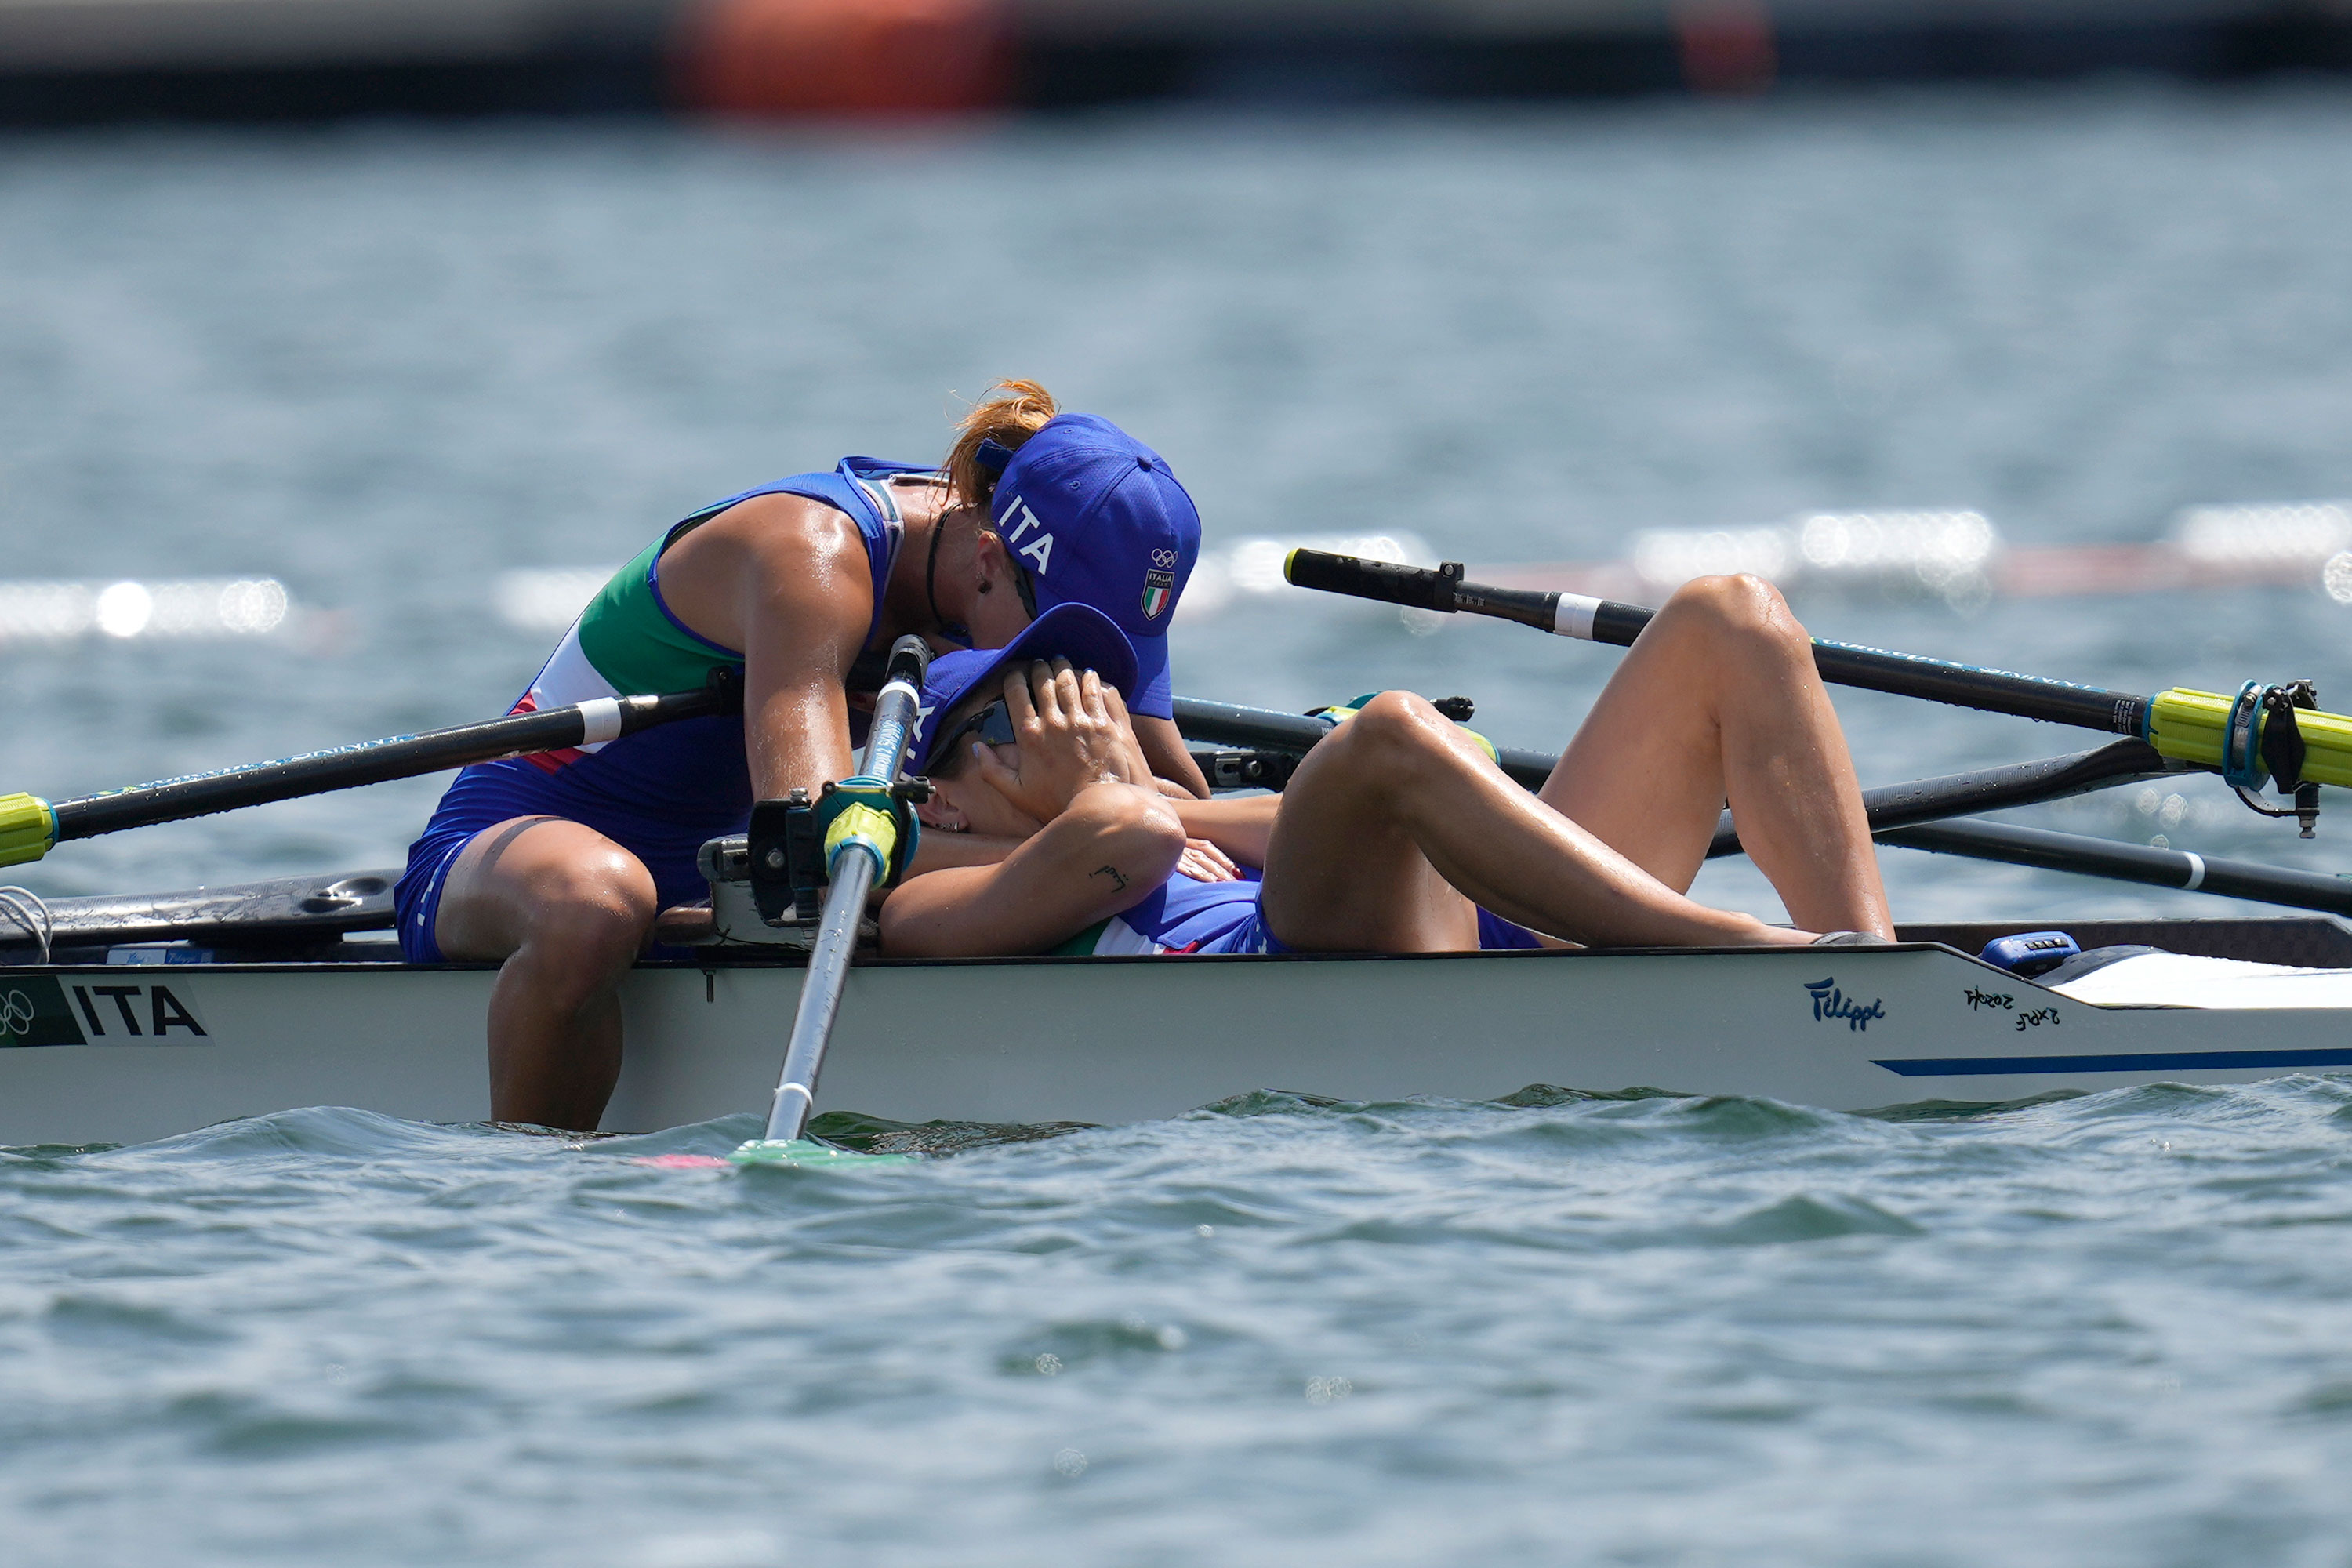 Italy's Valentina Rodini and Federica Cesarini react after winning gold in the lightweight rowing double sculls on July 29.